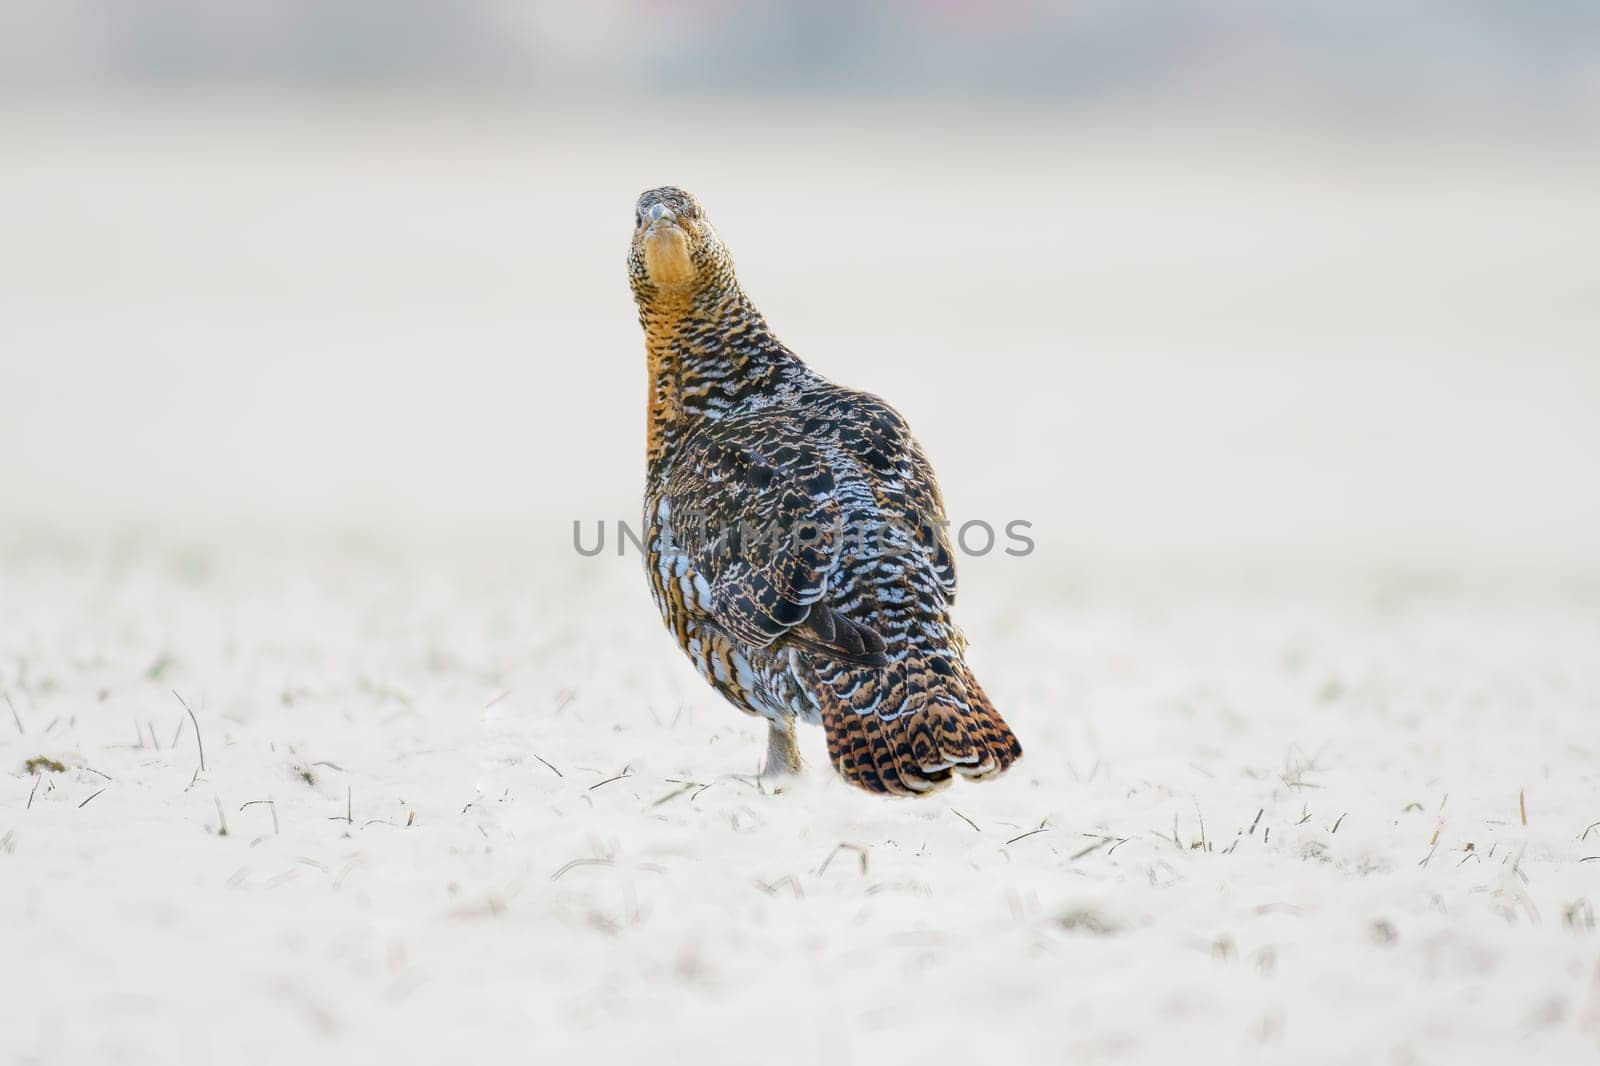 a grouse hen on a snowy forest in winter by mario_plechaty_photography